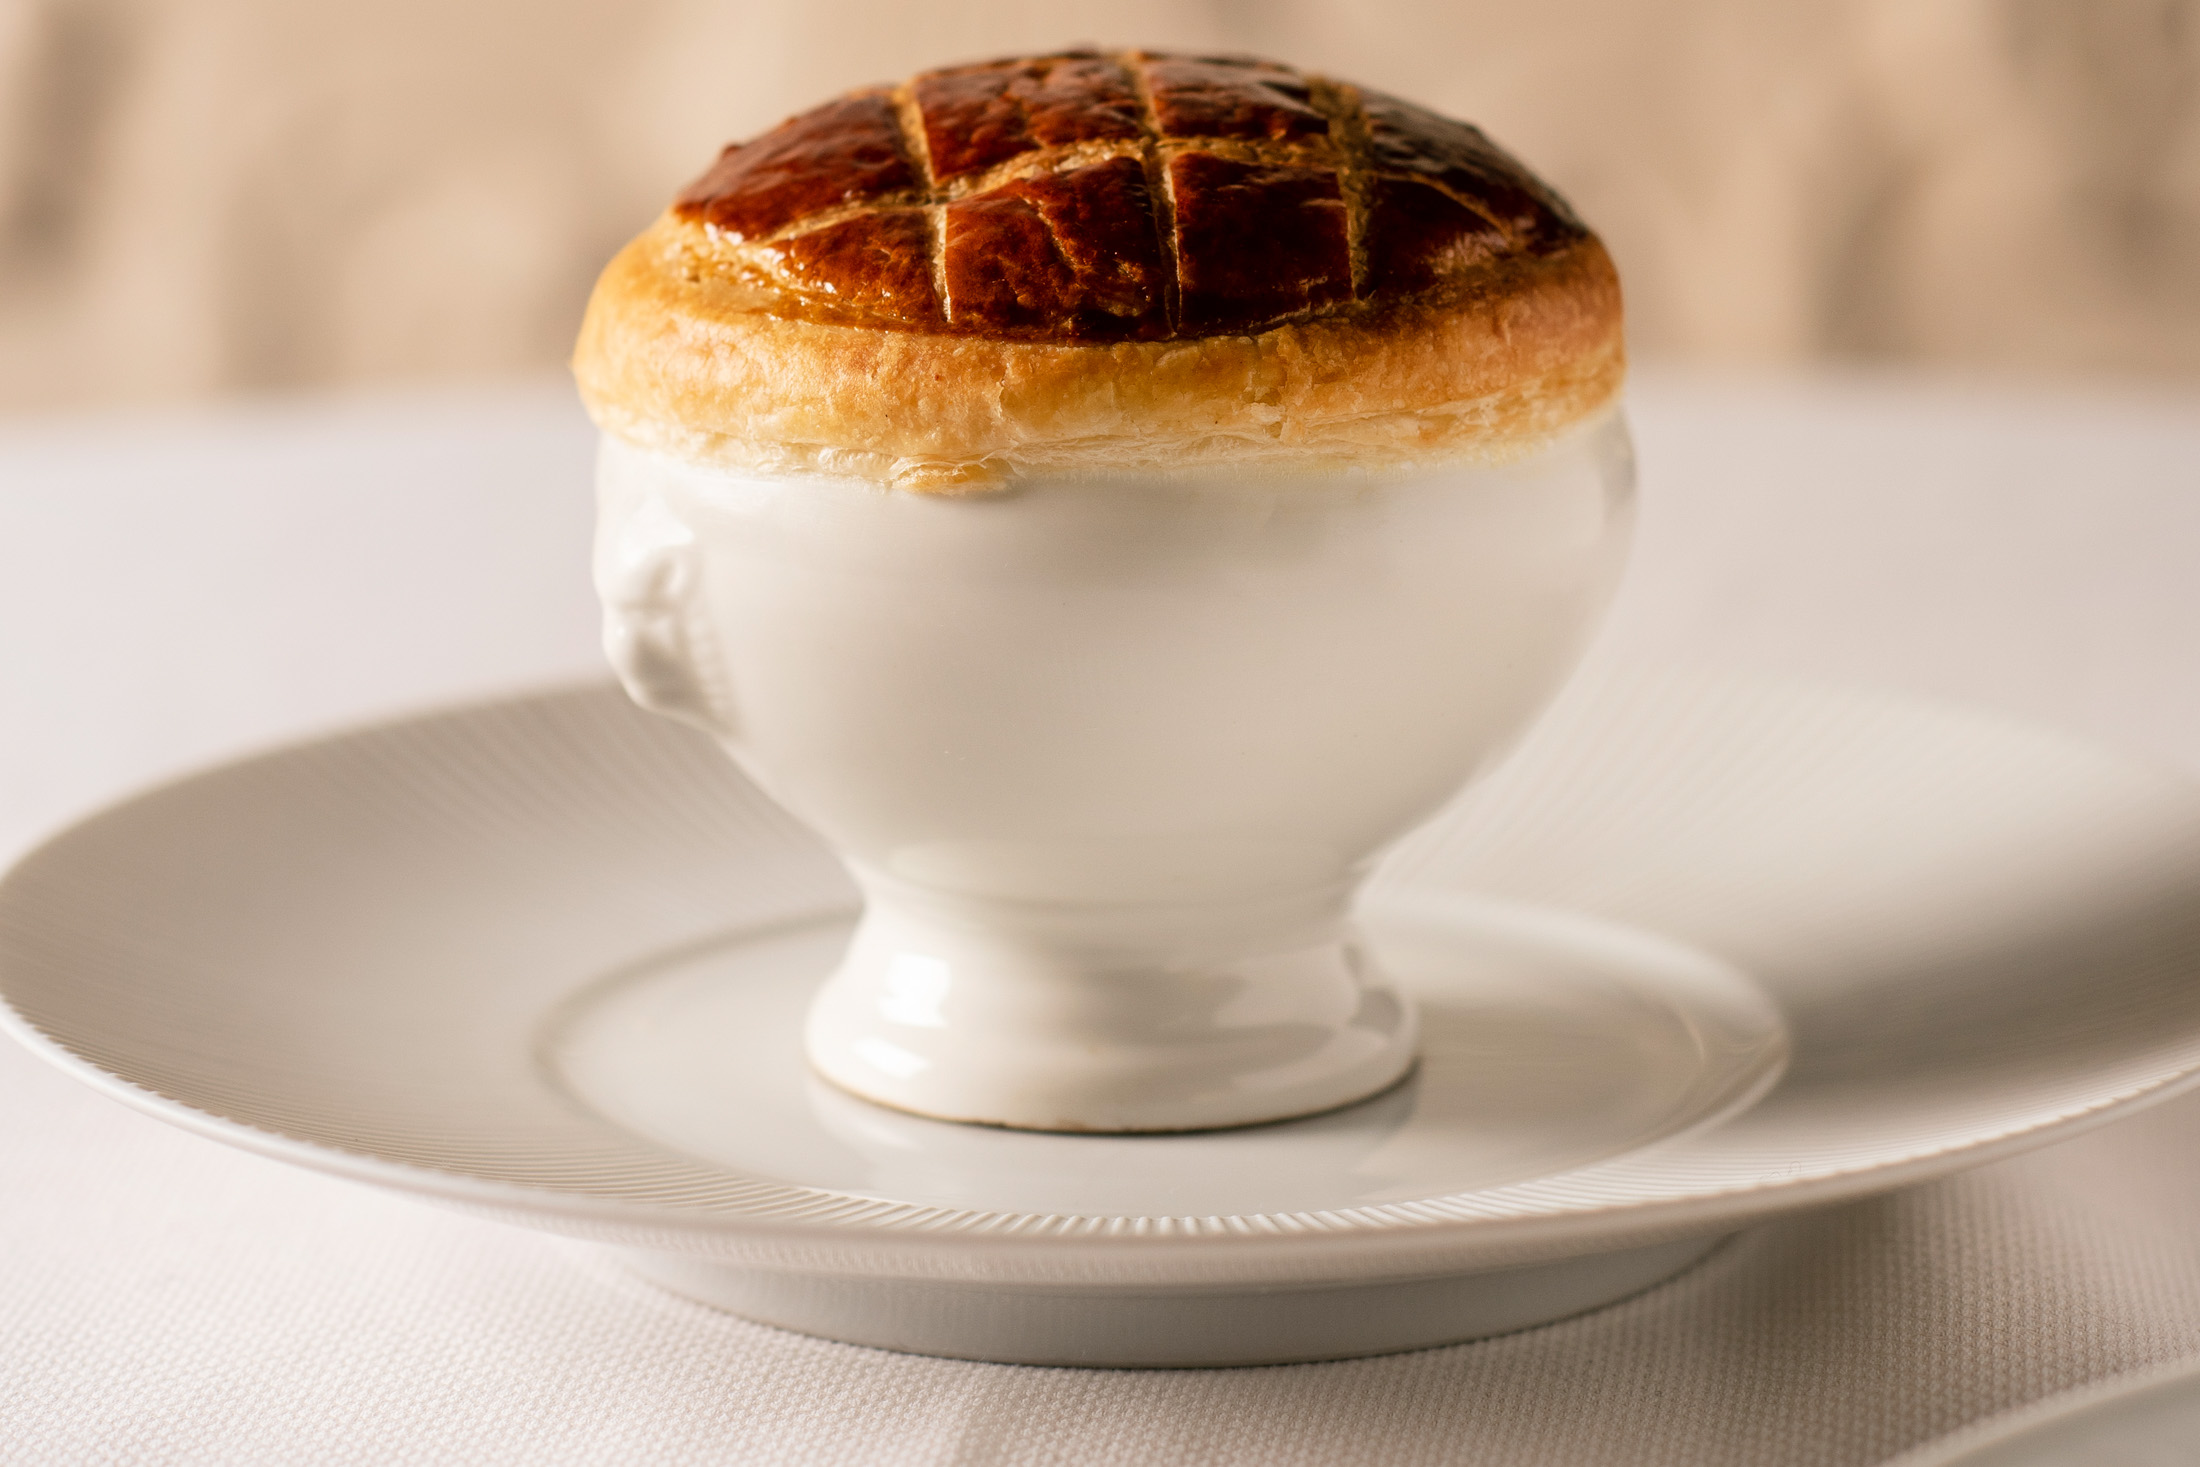 Underneath this pastry from Boulud&nbsp;is a decadent consommé with duck, savoy cabbage, and black truffle cream.